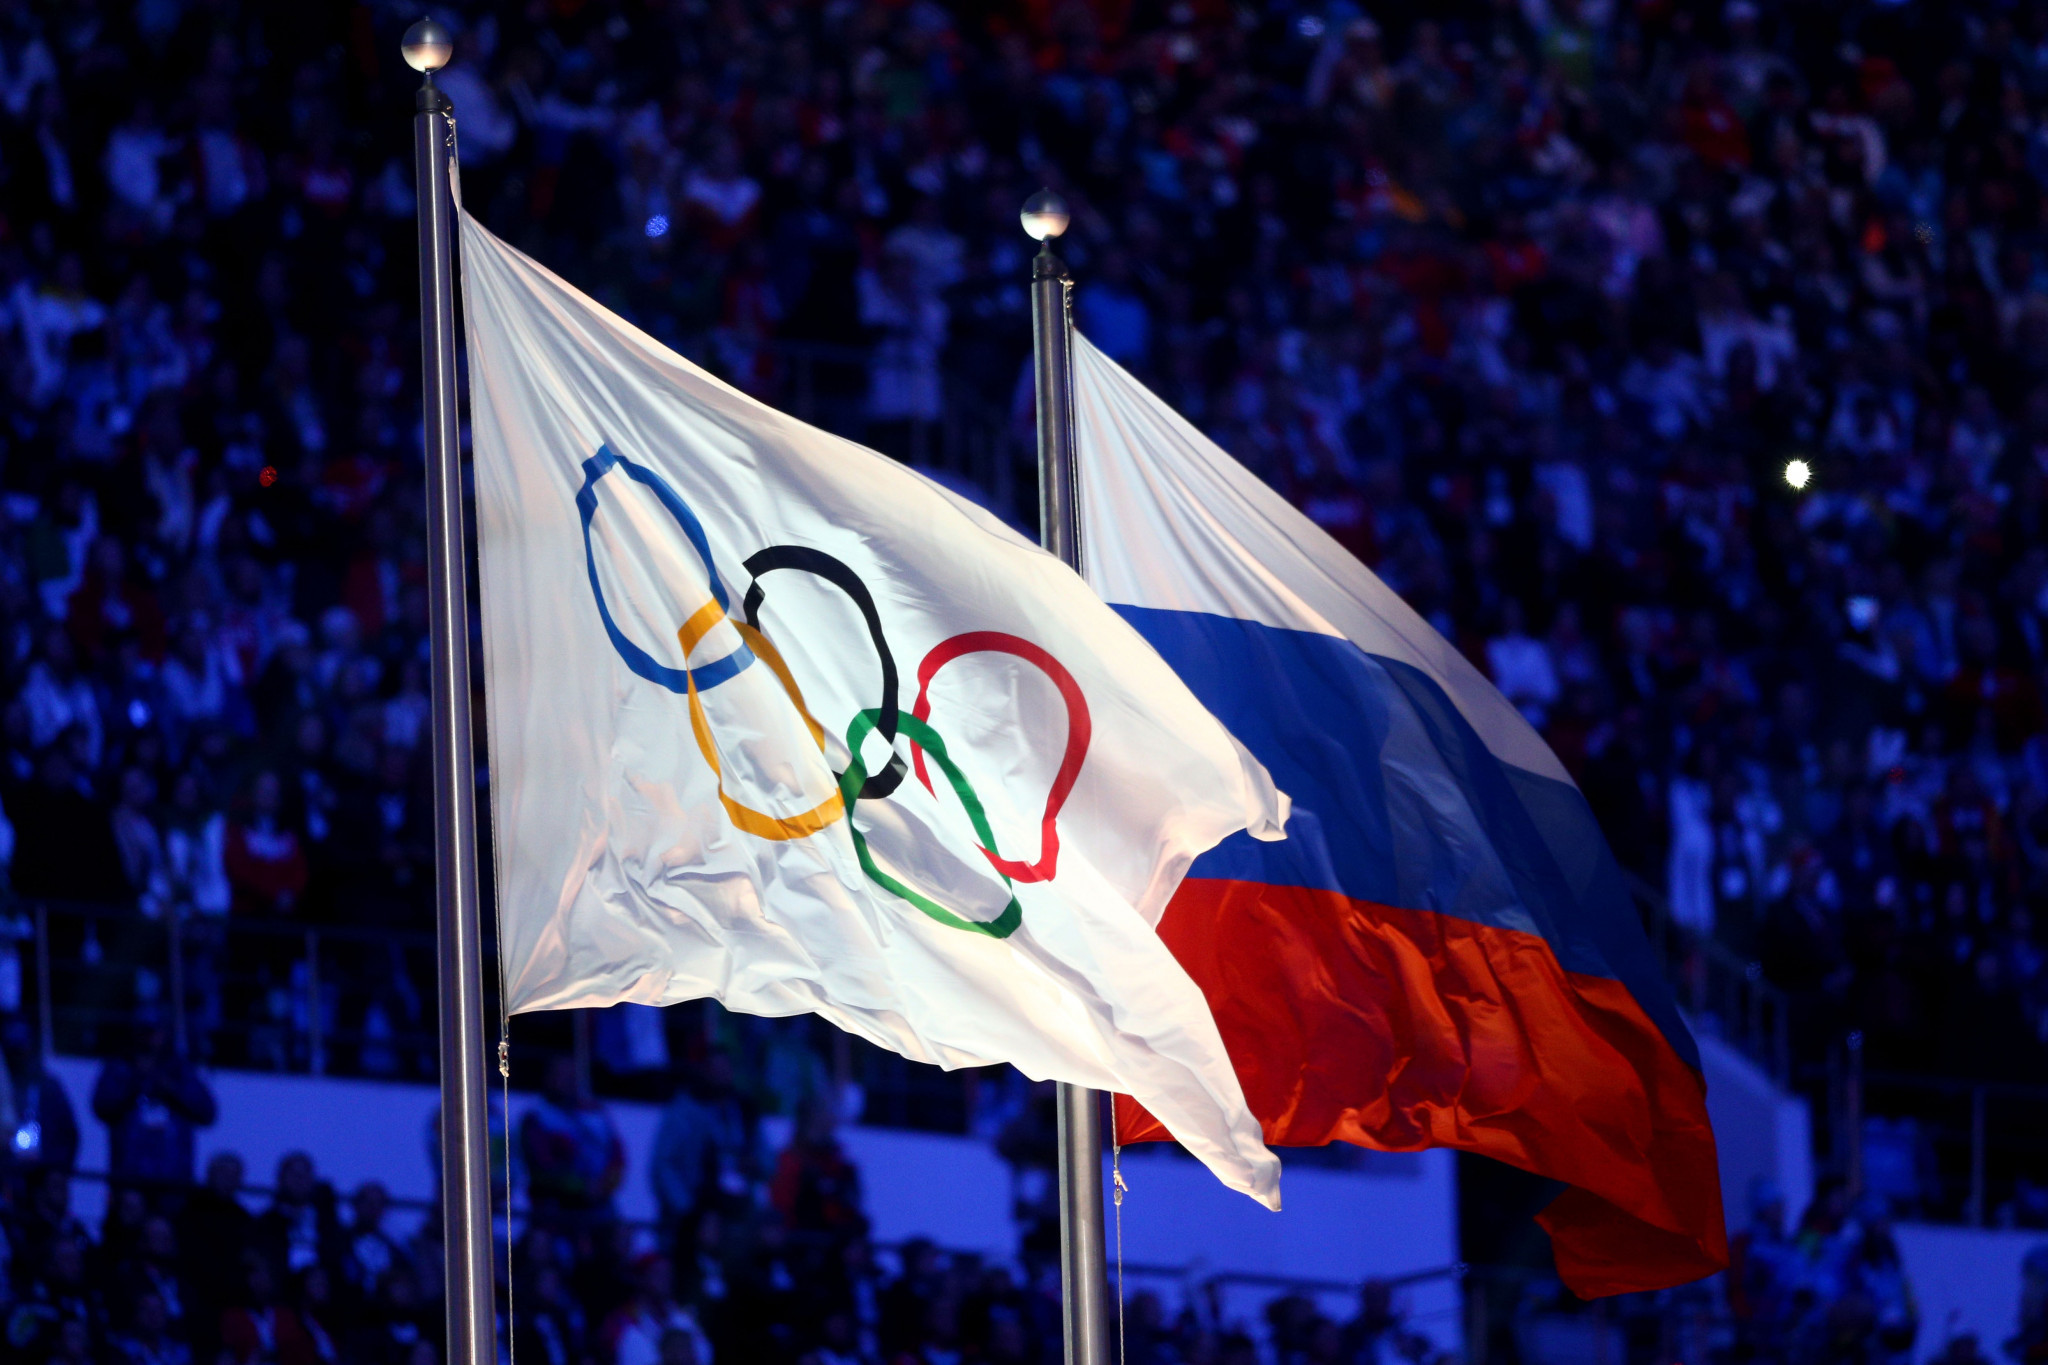 Russia's continued invasion of Ukraine has increased calls to exclude the nation from the Paris 2024 Olympic Games ©Getty Images